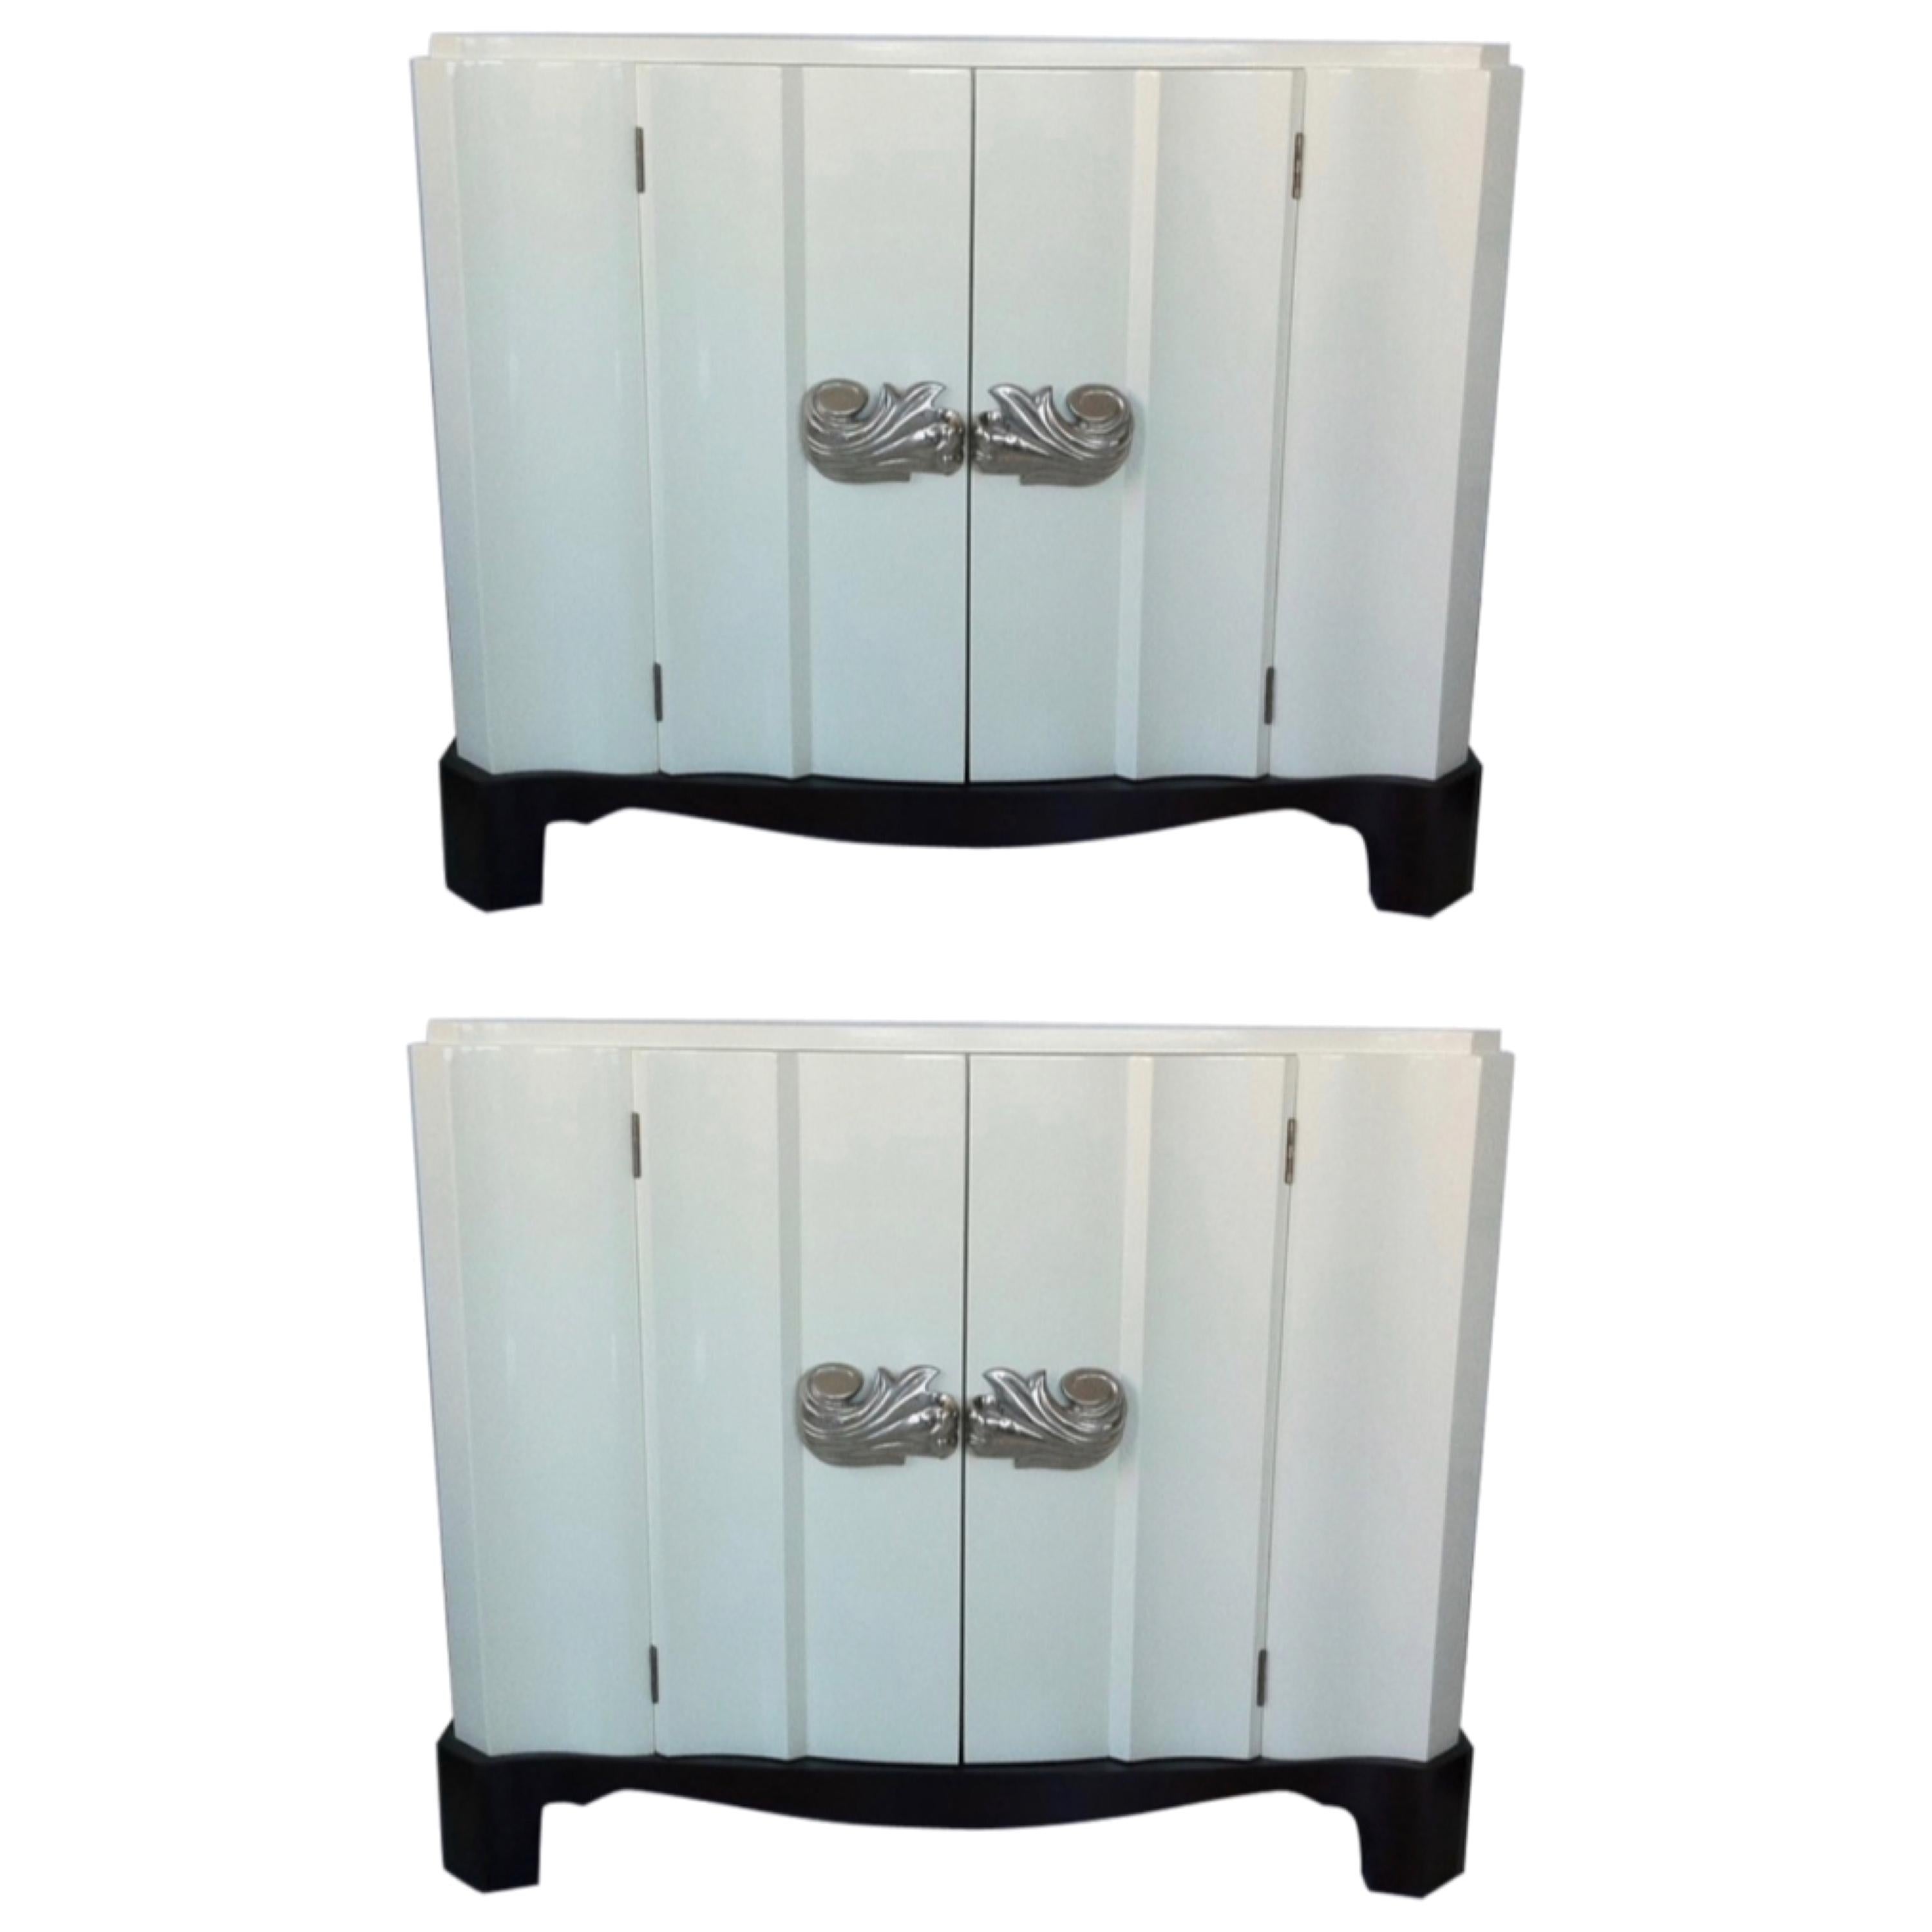 Pair of Dorothy Draper Serpentine Chests in Ivory Lacquer with Nickel Pulls For Sale